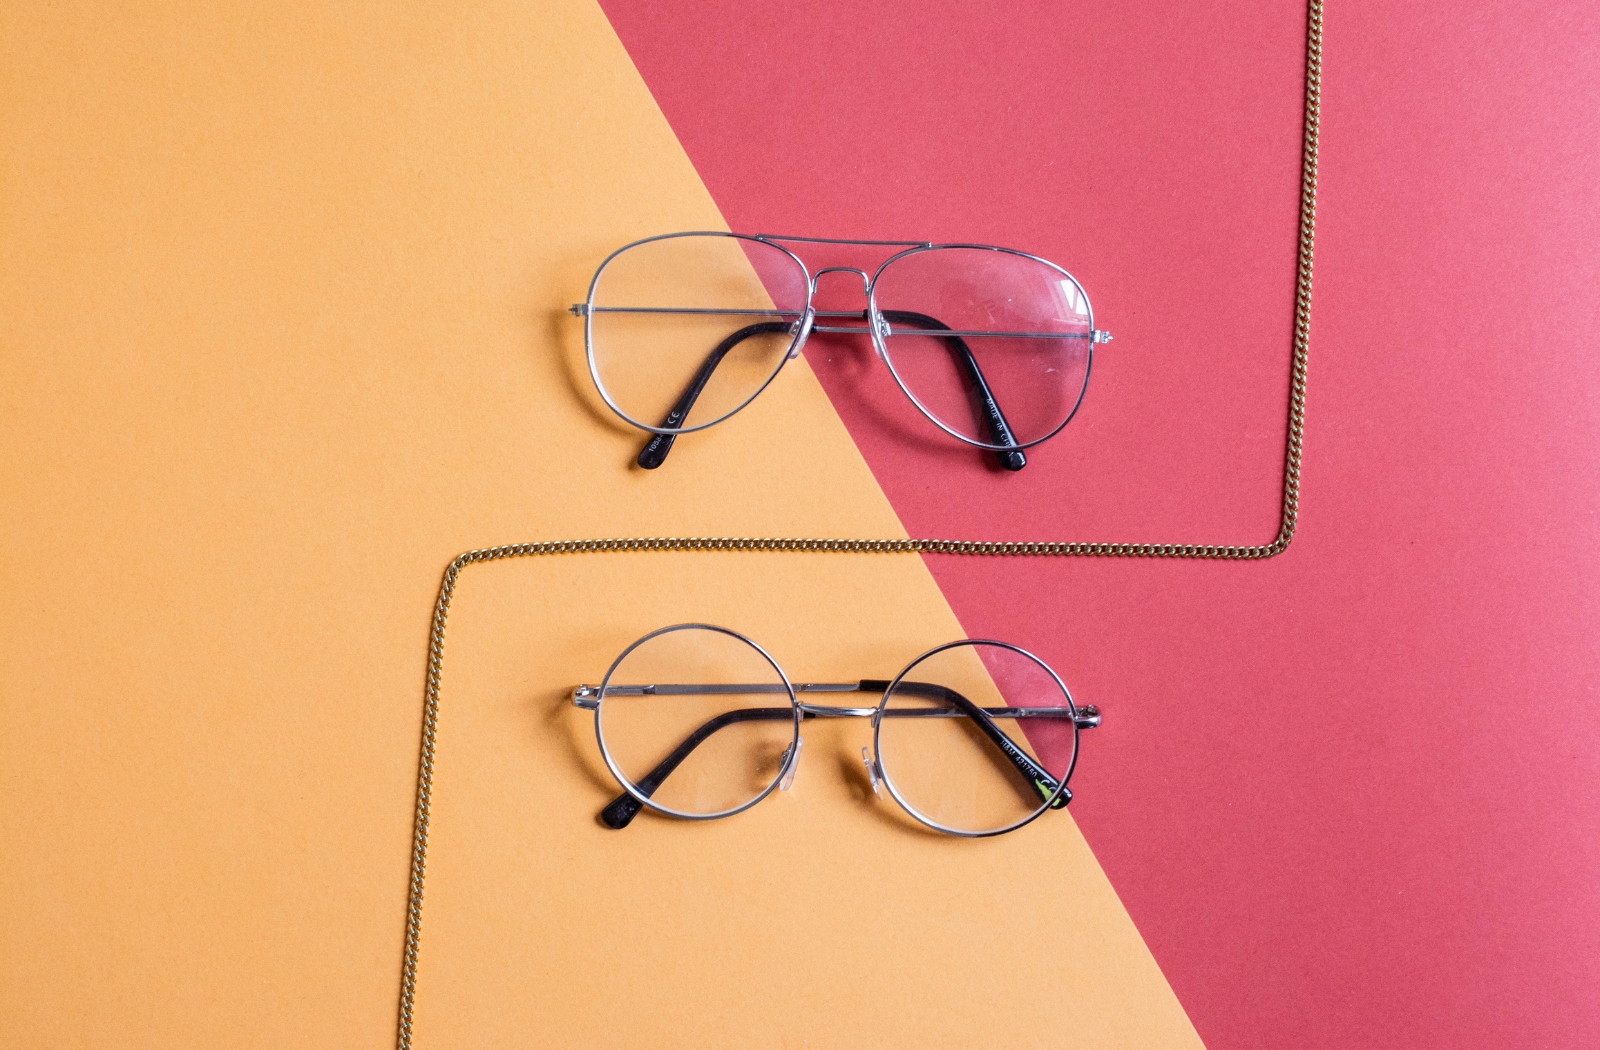 9. "The Perfect Eyeglass Frames for Blonde Hair: A Stylist's Picks" - wide 2